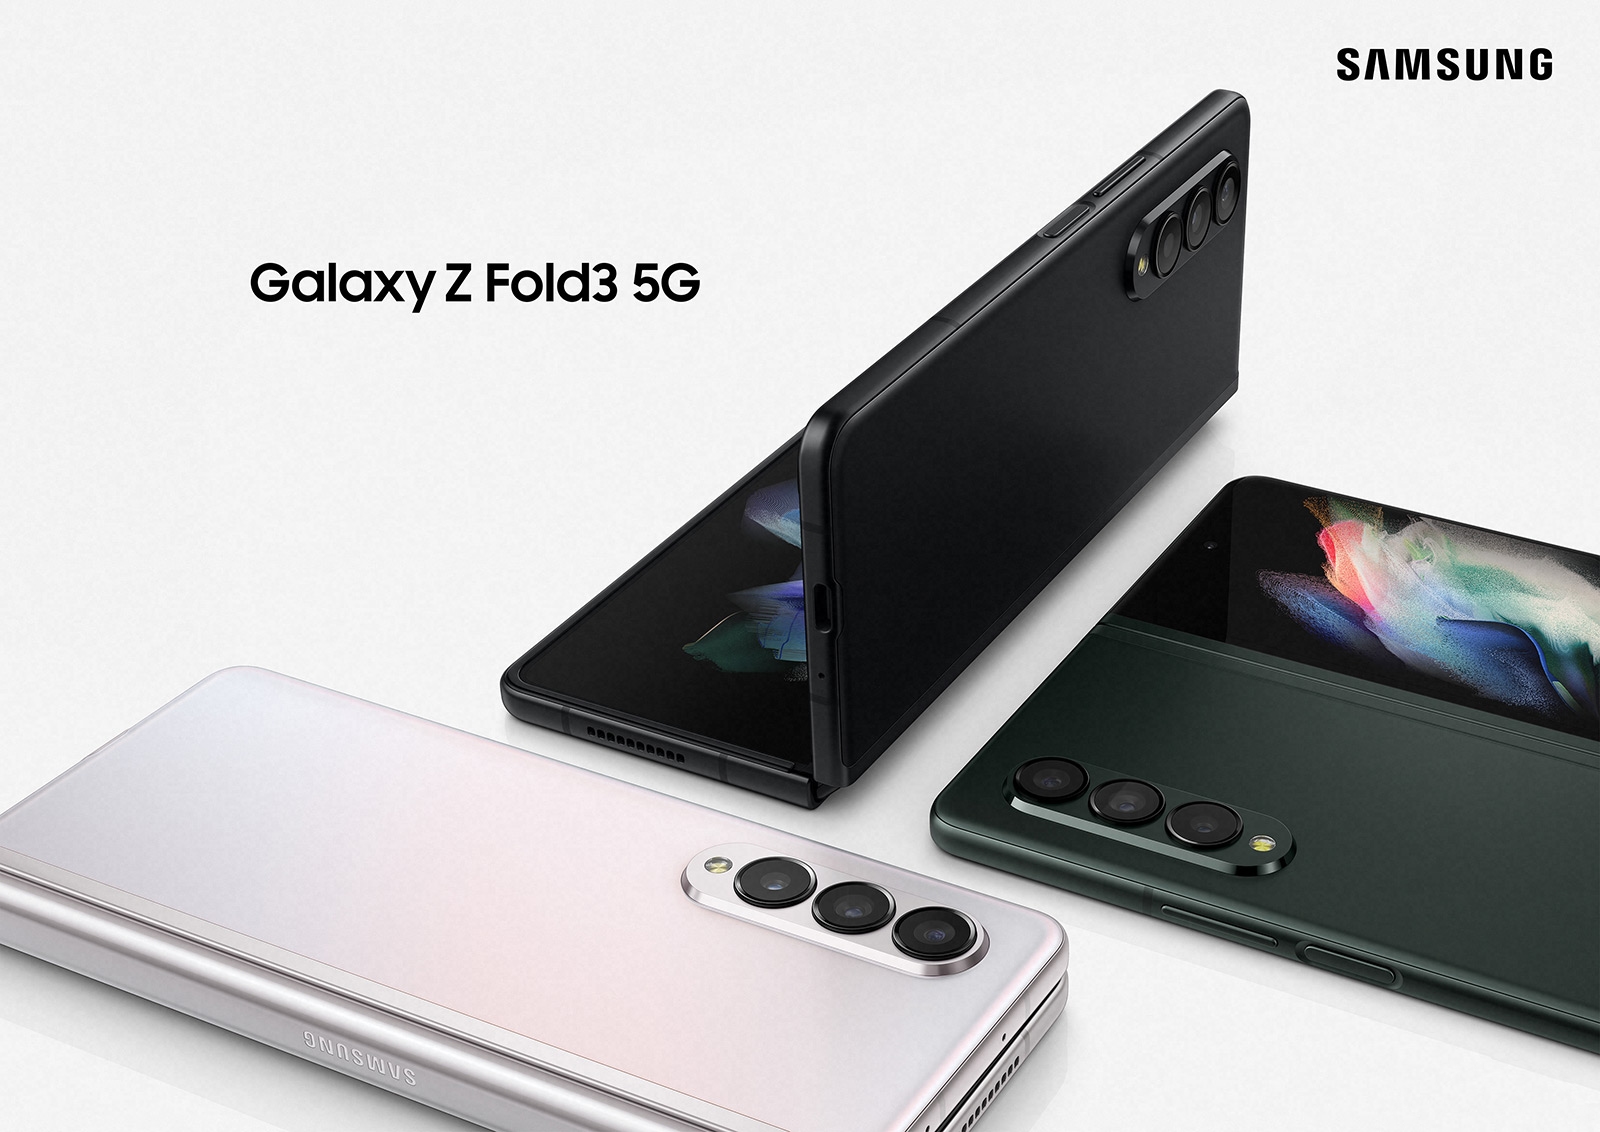 Following the Galaxy Z Flip 3: Samsung has started to update the Galaxy Z Fold 3 to Android 12 with One UI 4.0